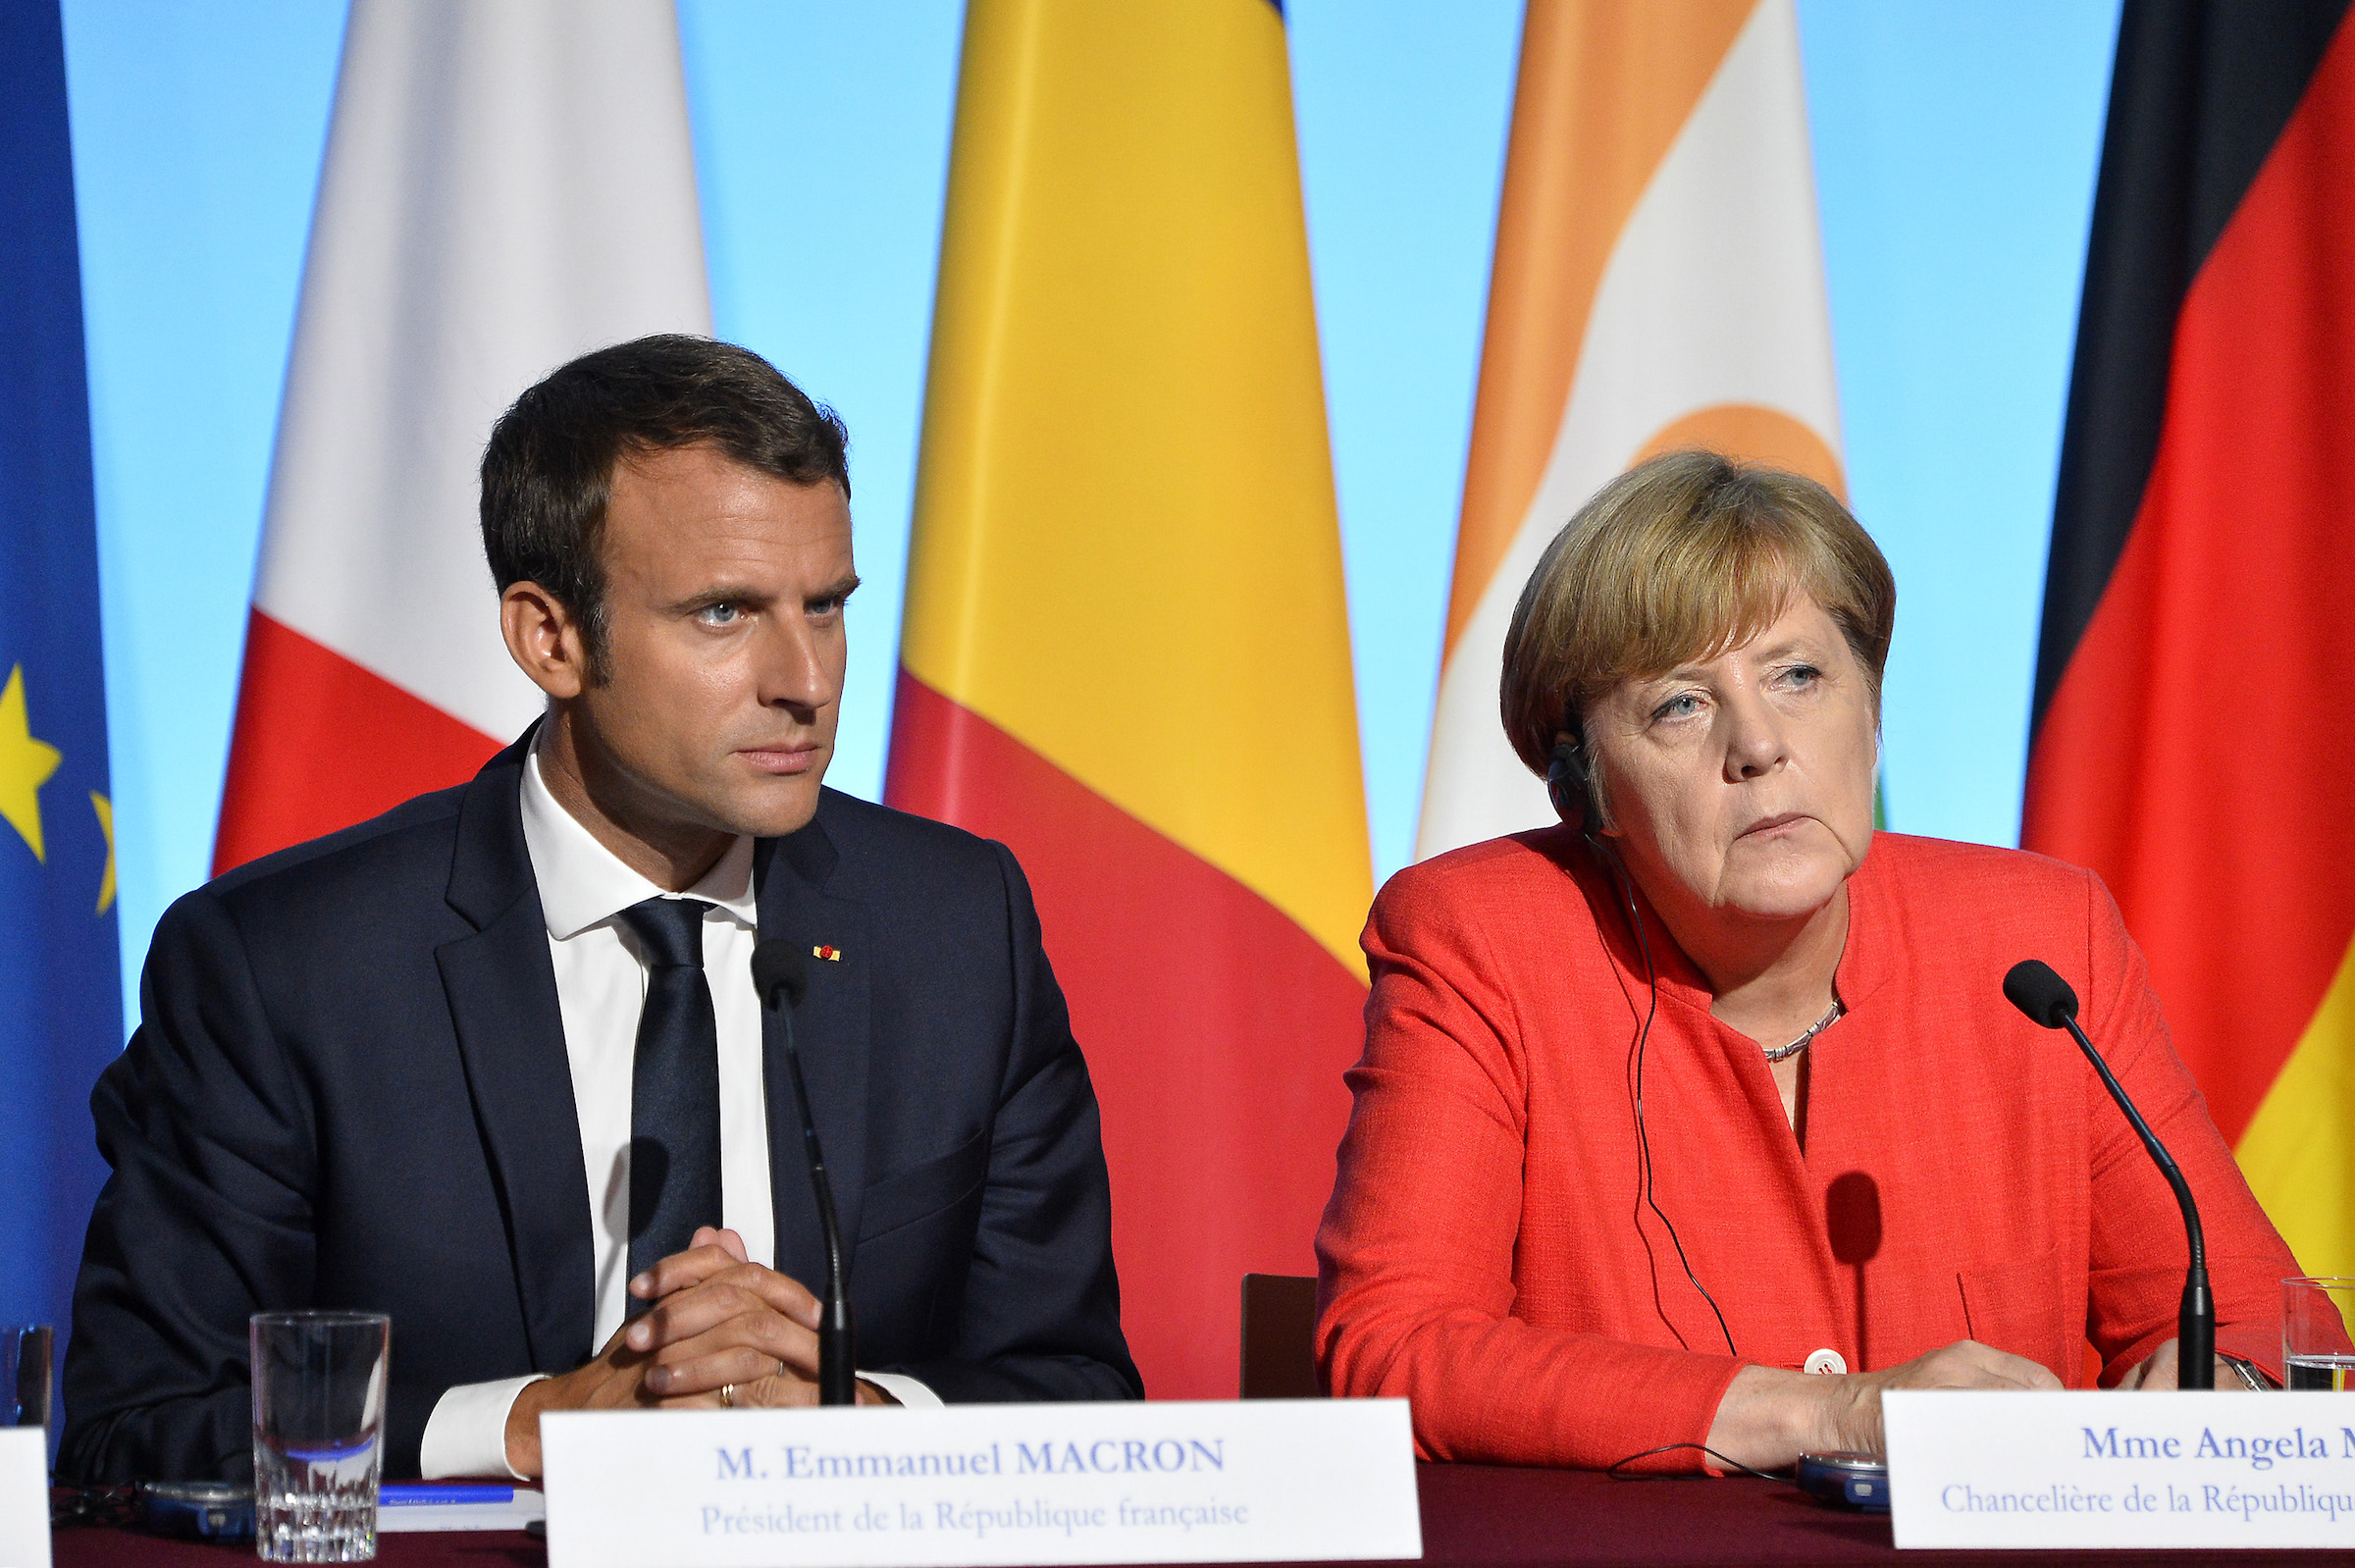 French President Emmanuel Macron and German Chancelor Angela Merkel react during a press conference after the multinational meeting at Elysee Palace on August 28, 2017 in Paris, France. (Aurelien Meunier&mdash;Getty Images)